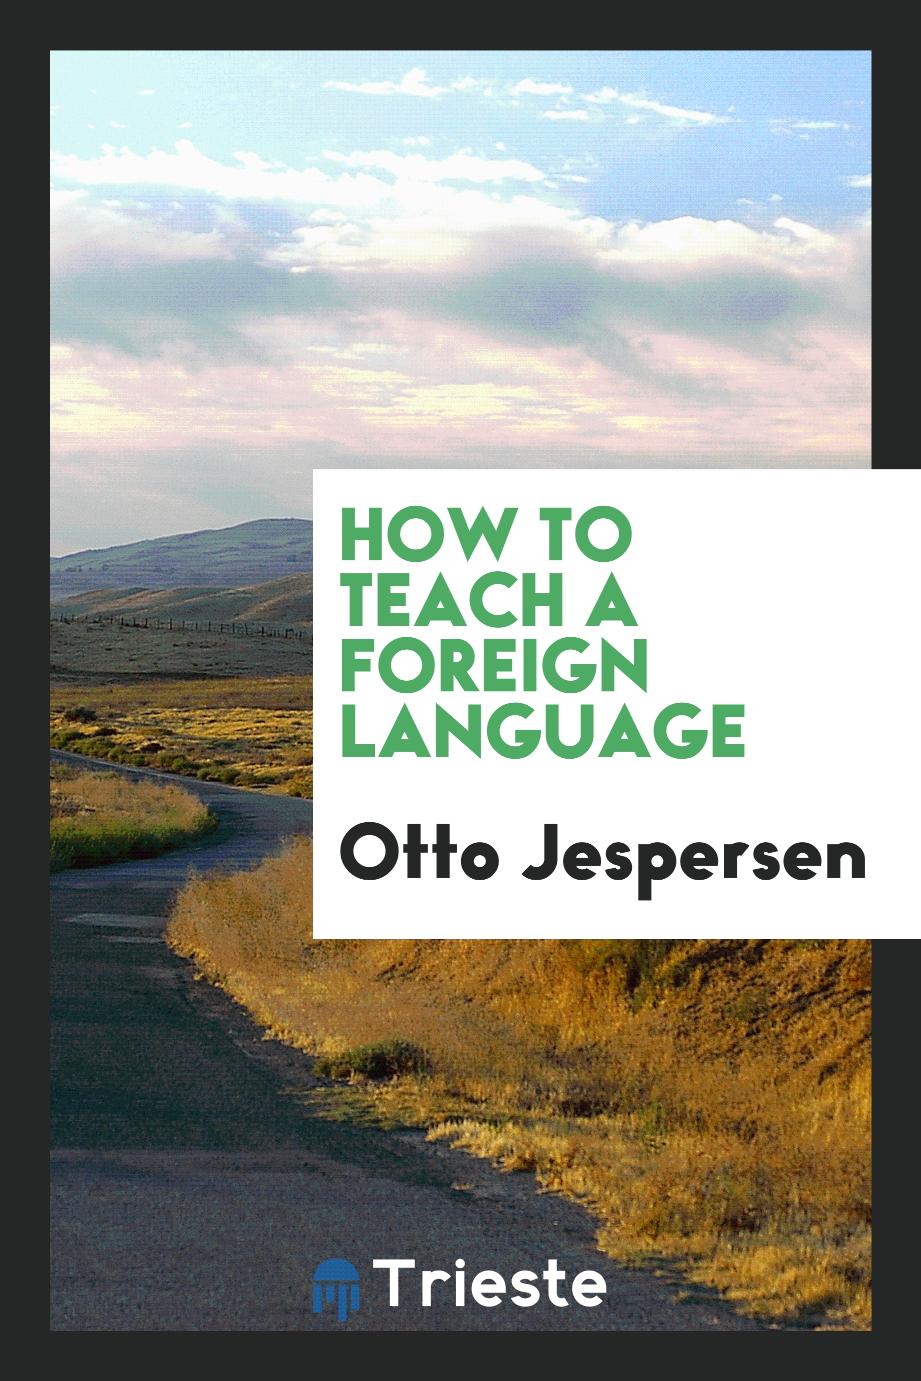 How to teach a foreign language